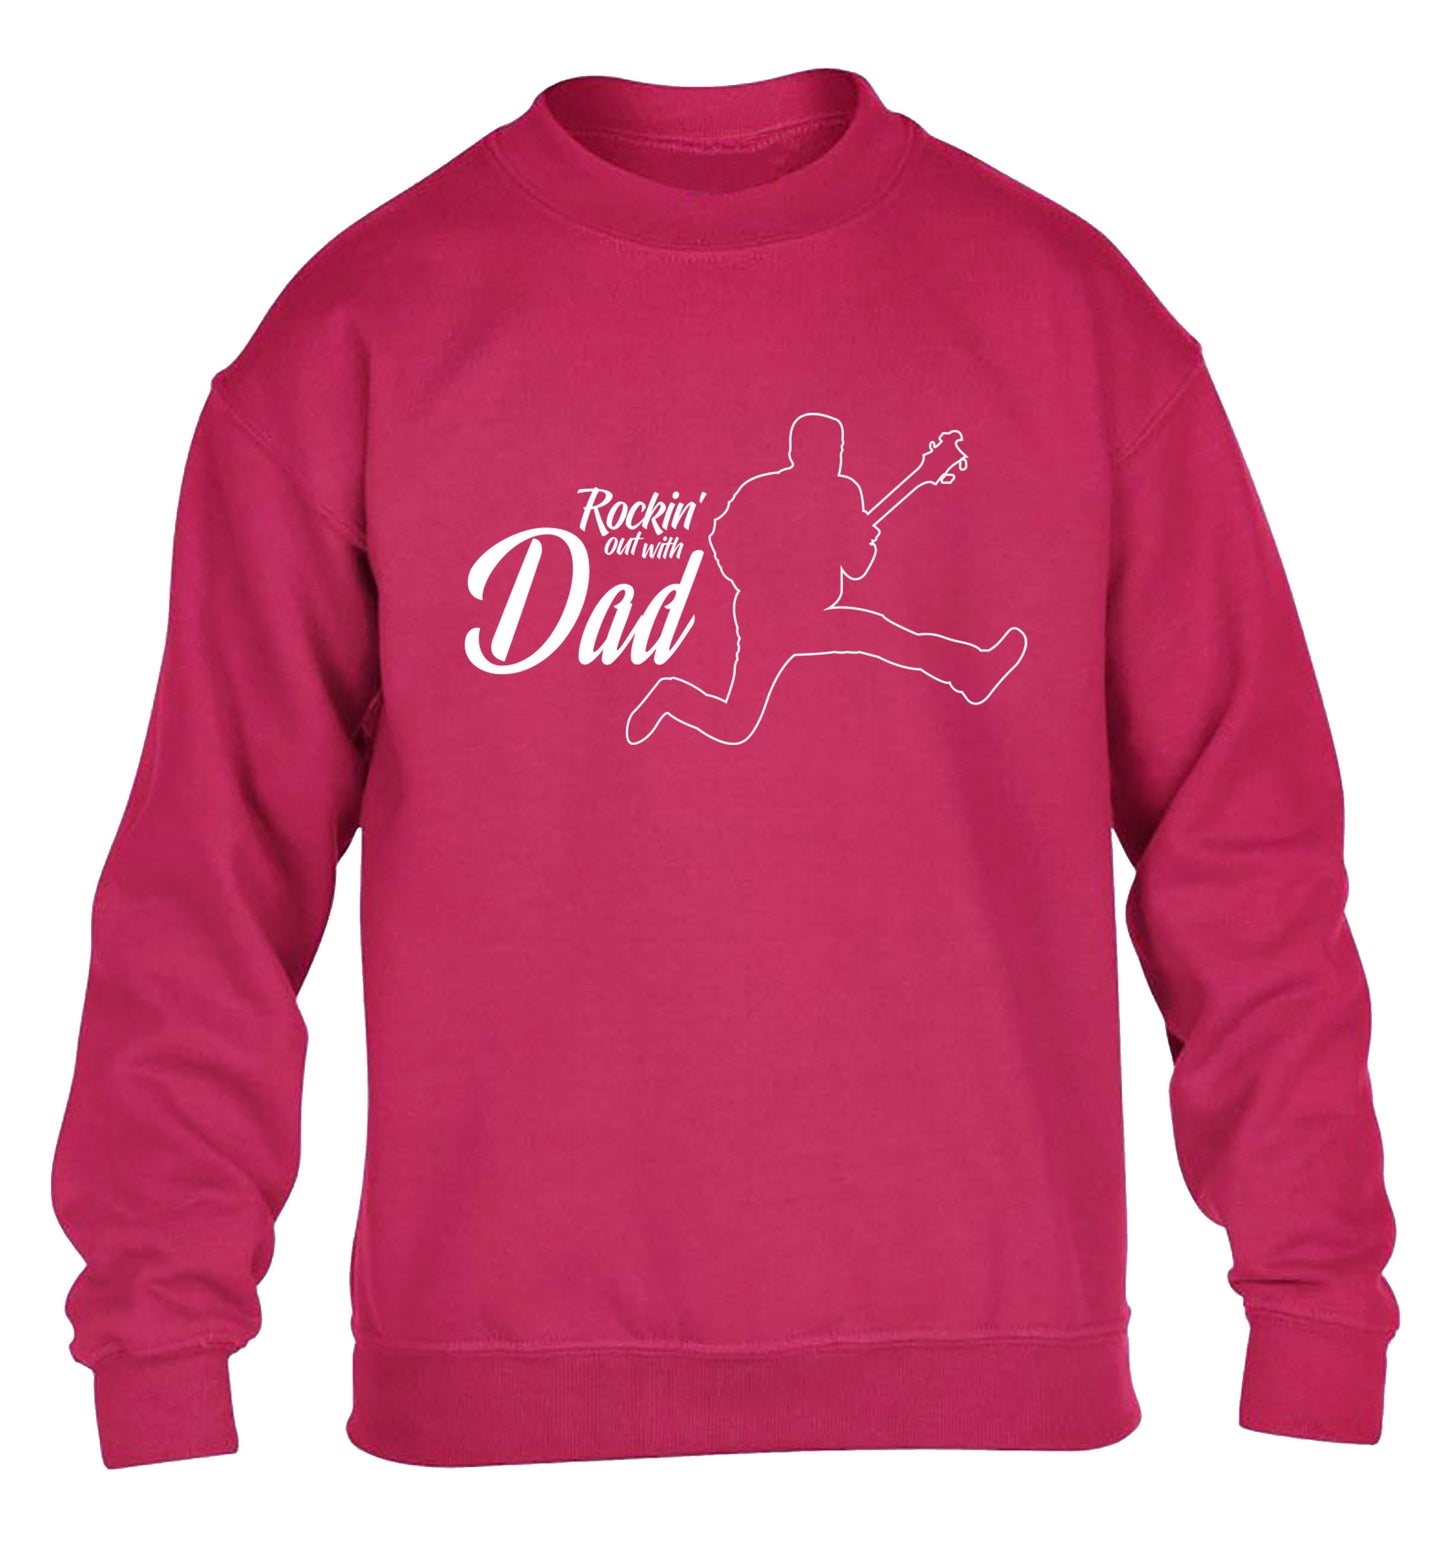 Rockin out with dad children's pink sweater 12-13 Years